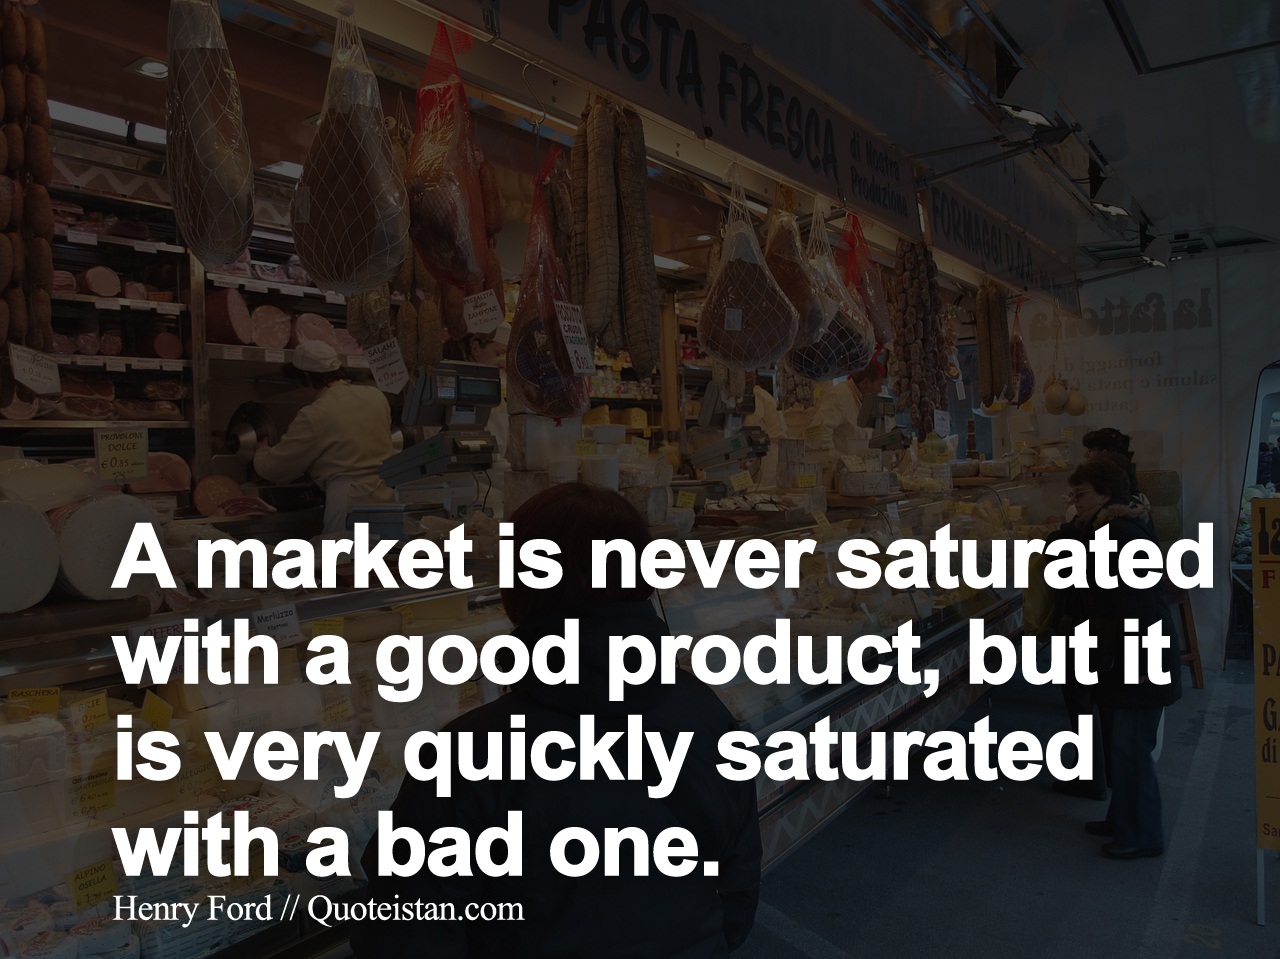 A market is never saturated with a good product, but it is very quickly saturated with a bad one.